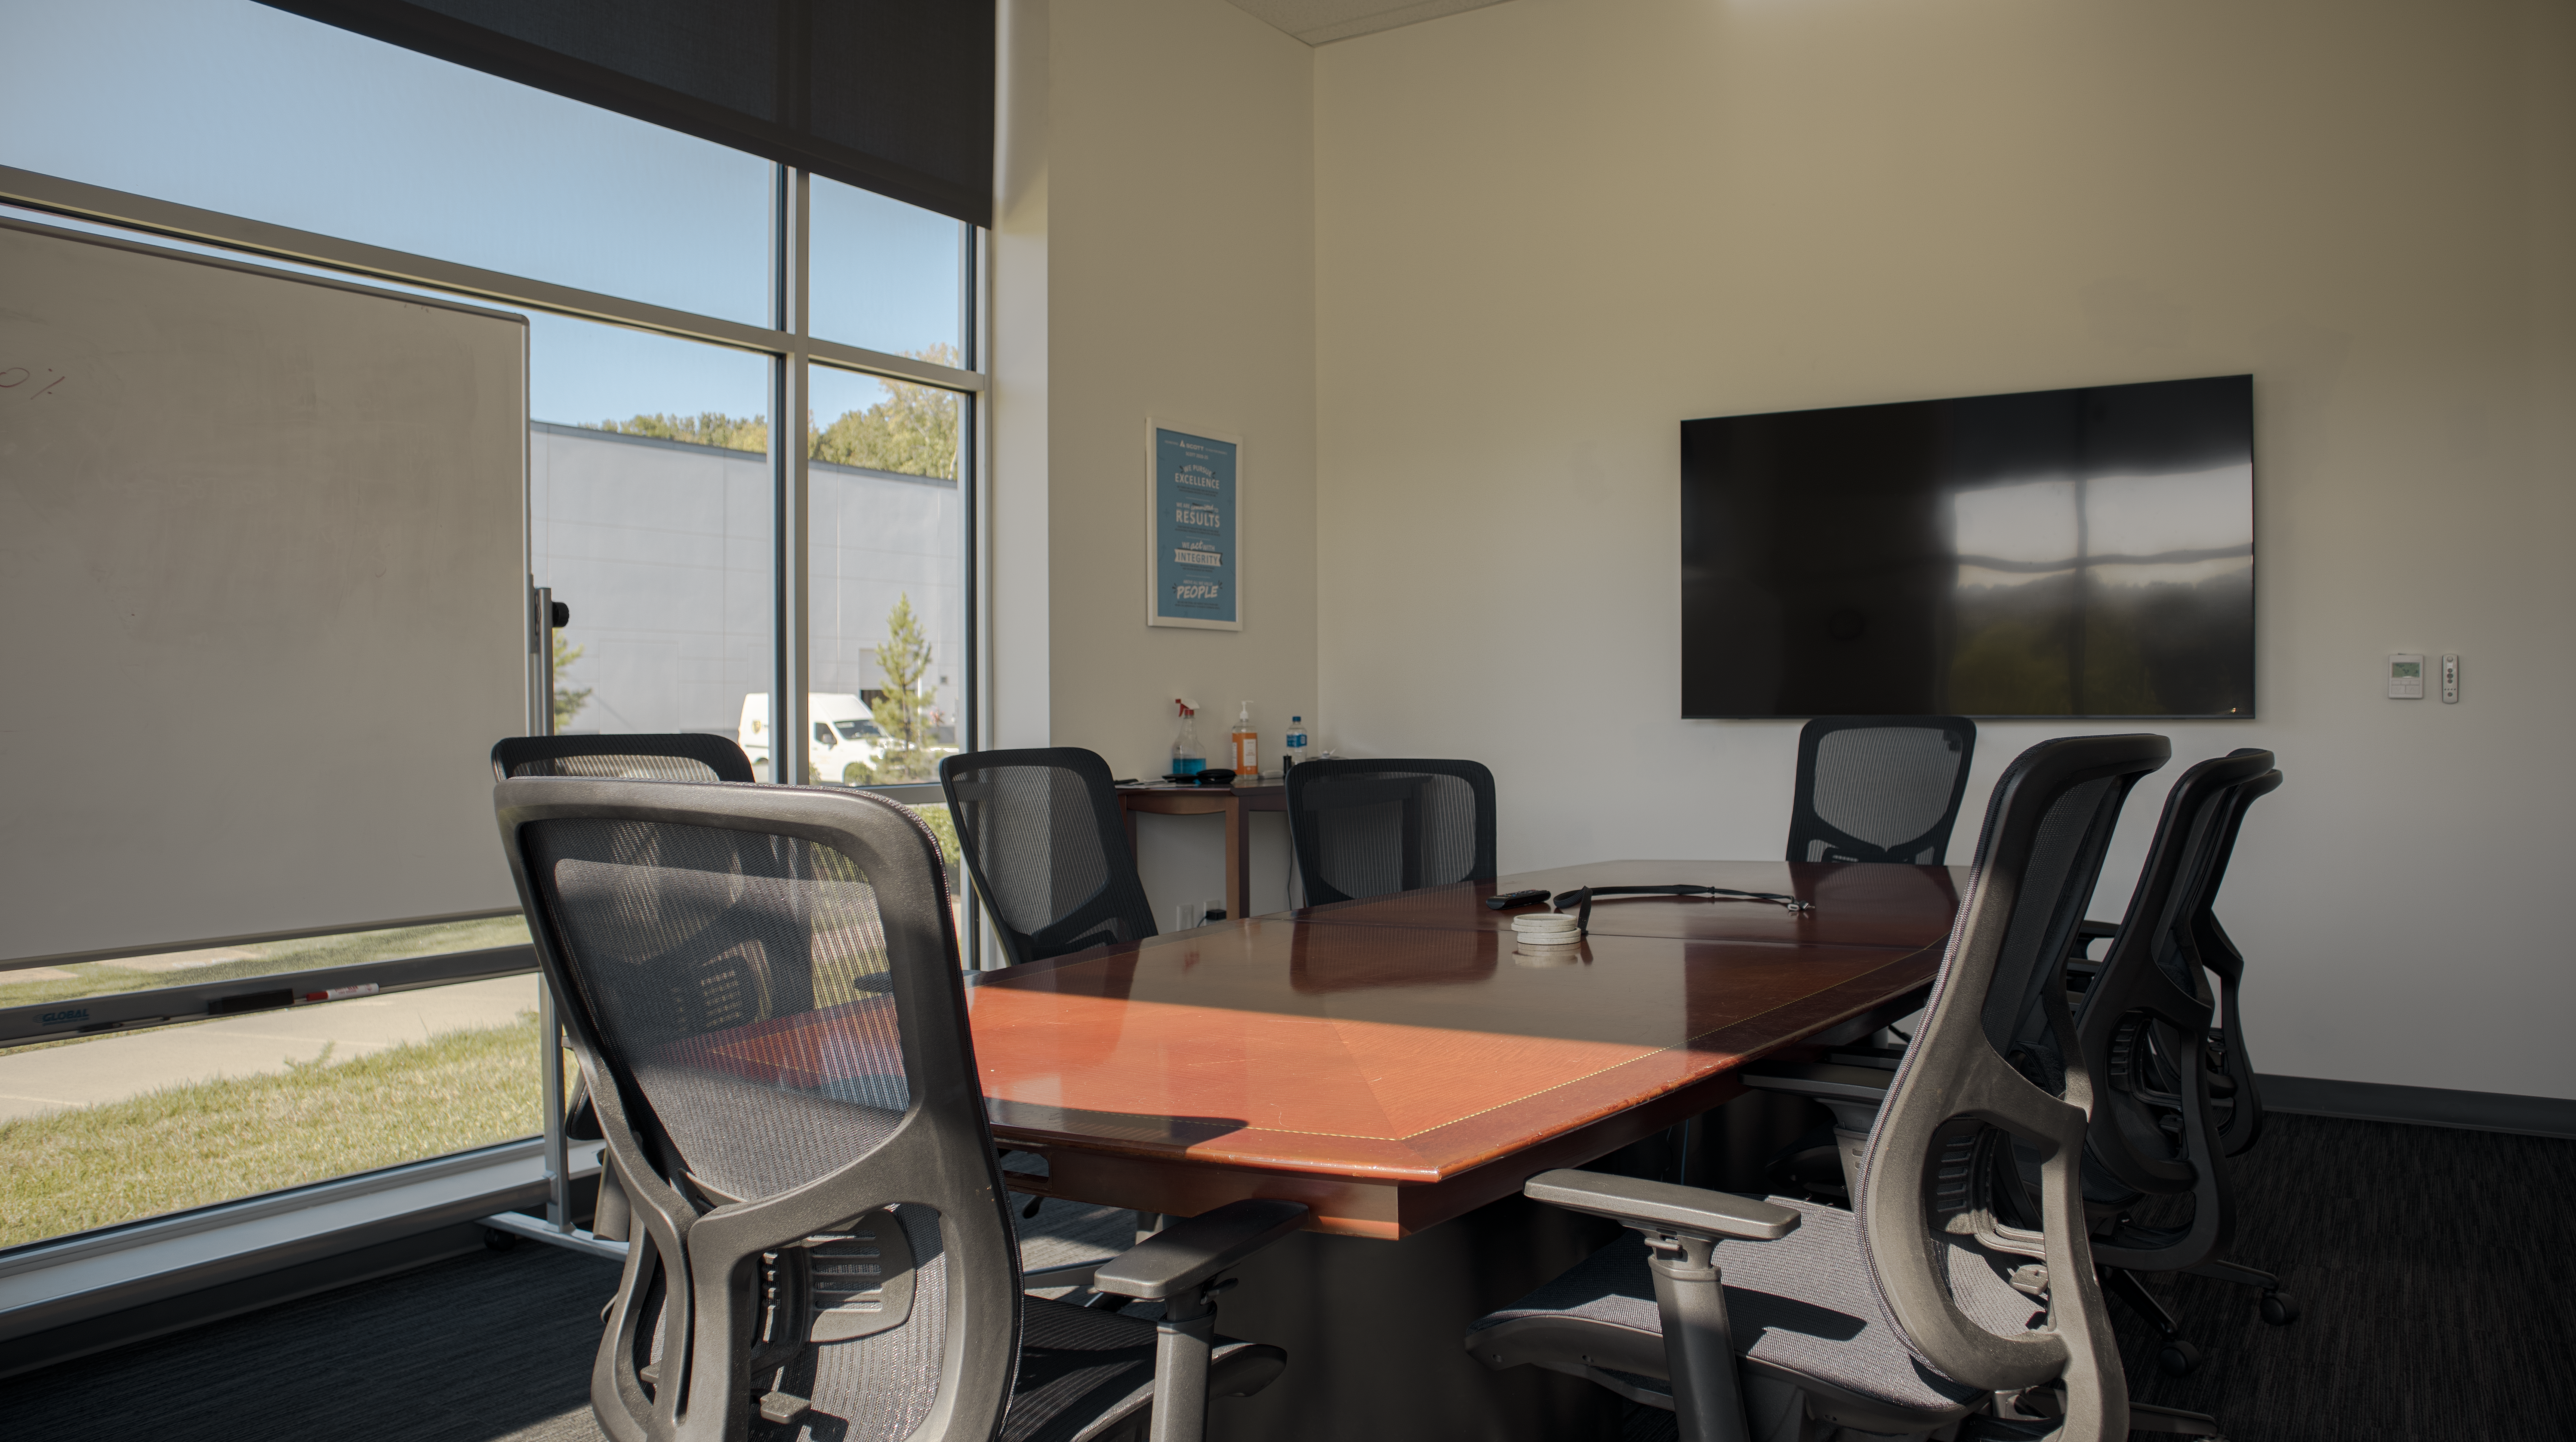 A naturally lit, beige-walled conference room during a clear summer day in the afternoon.